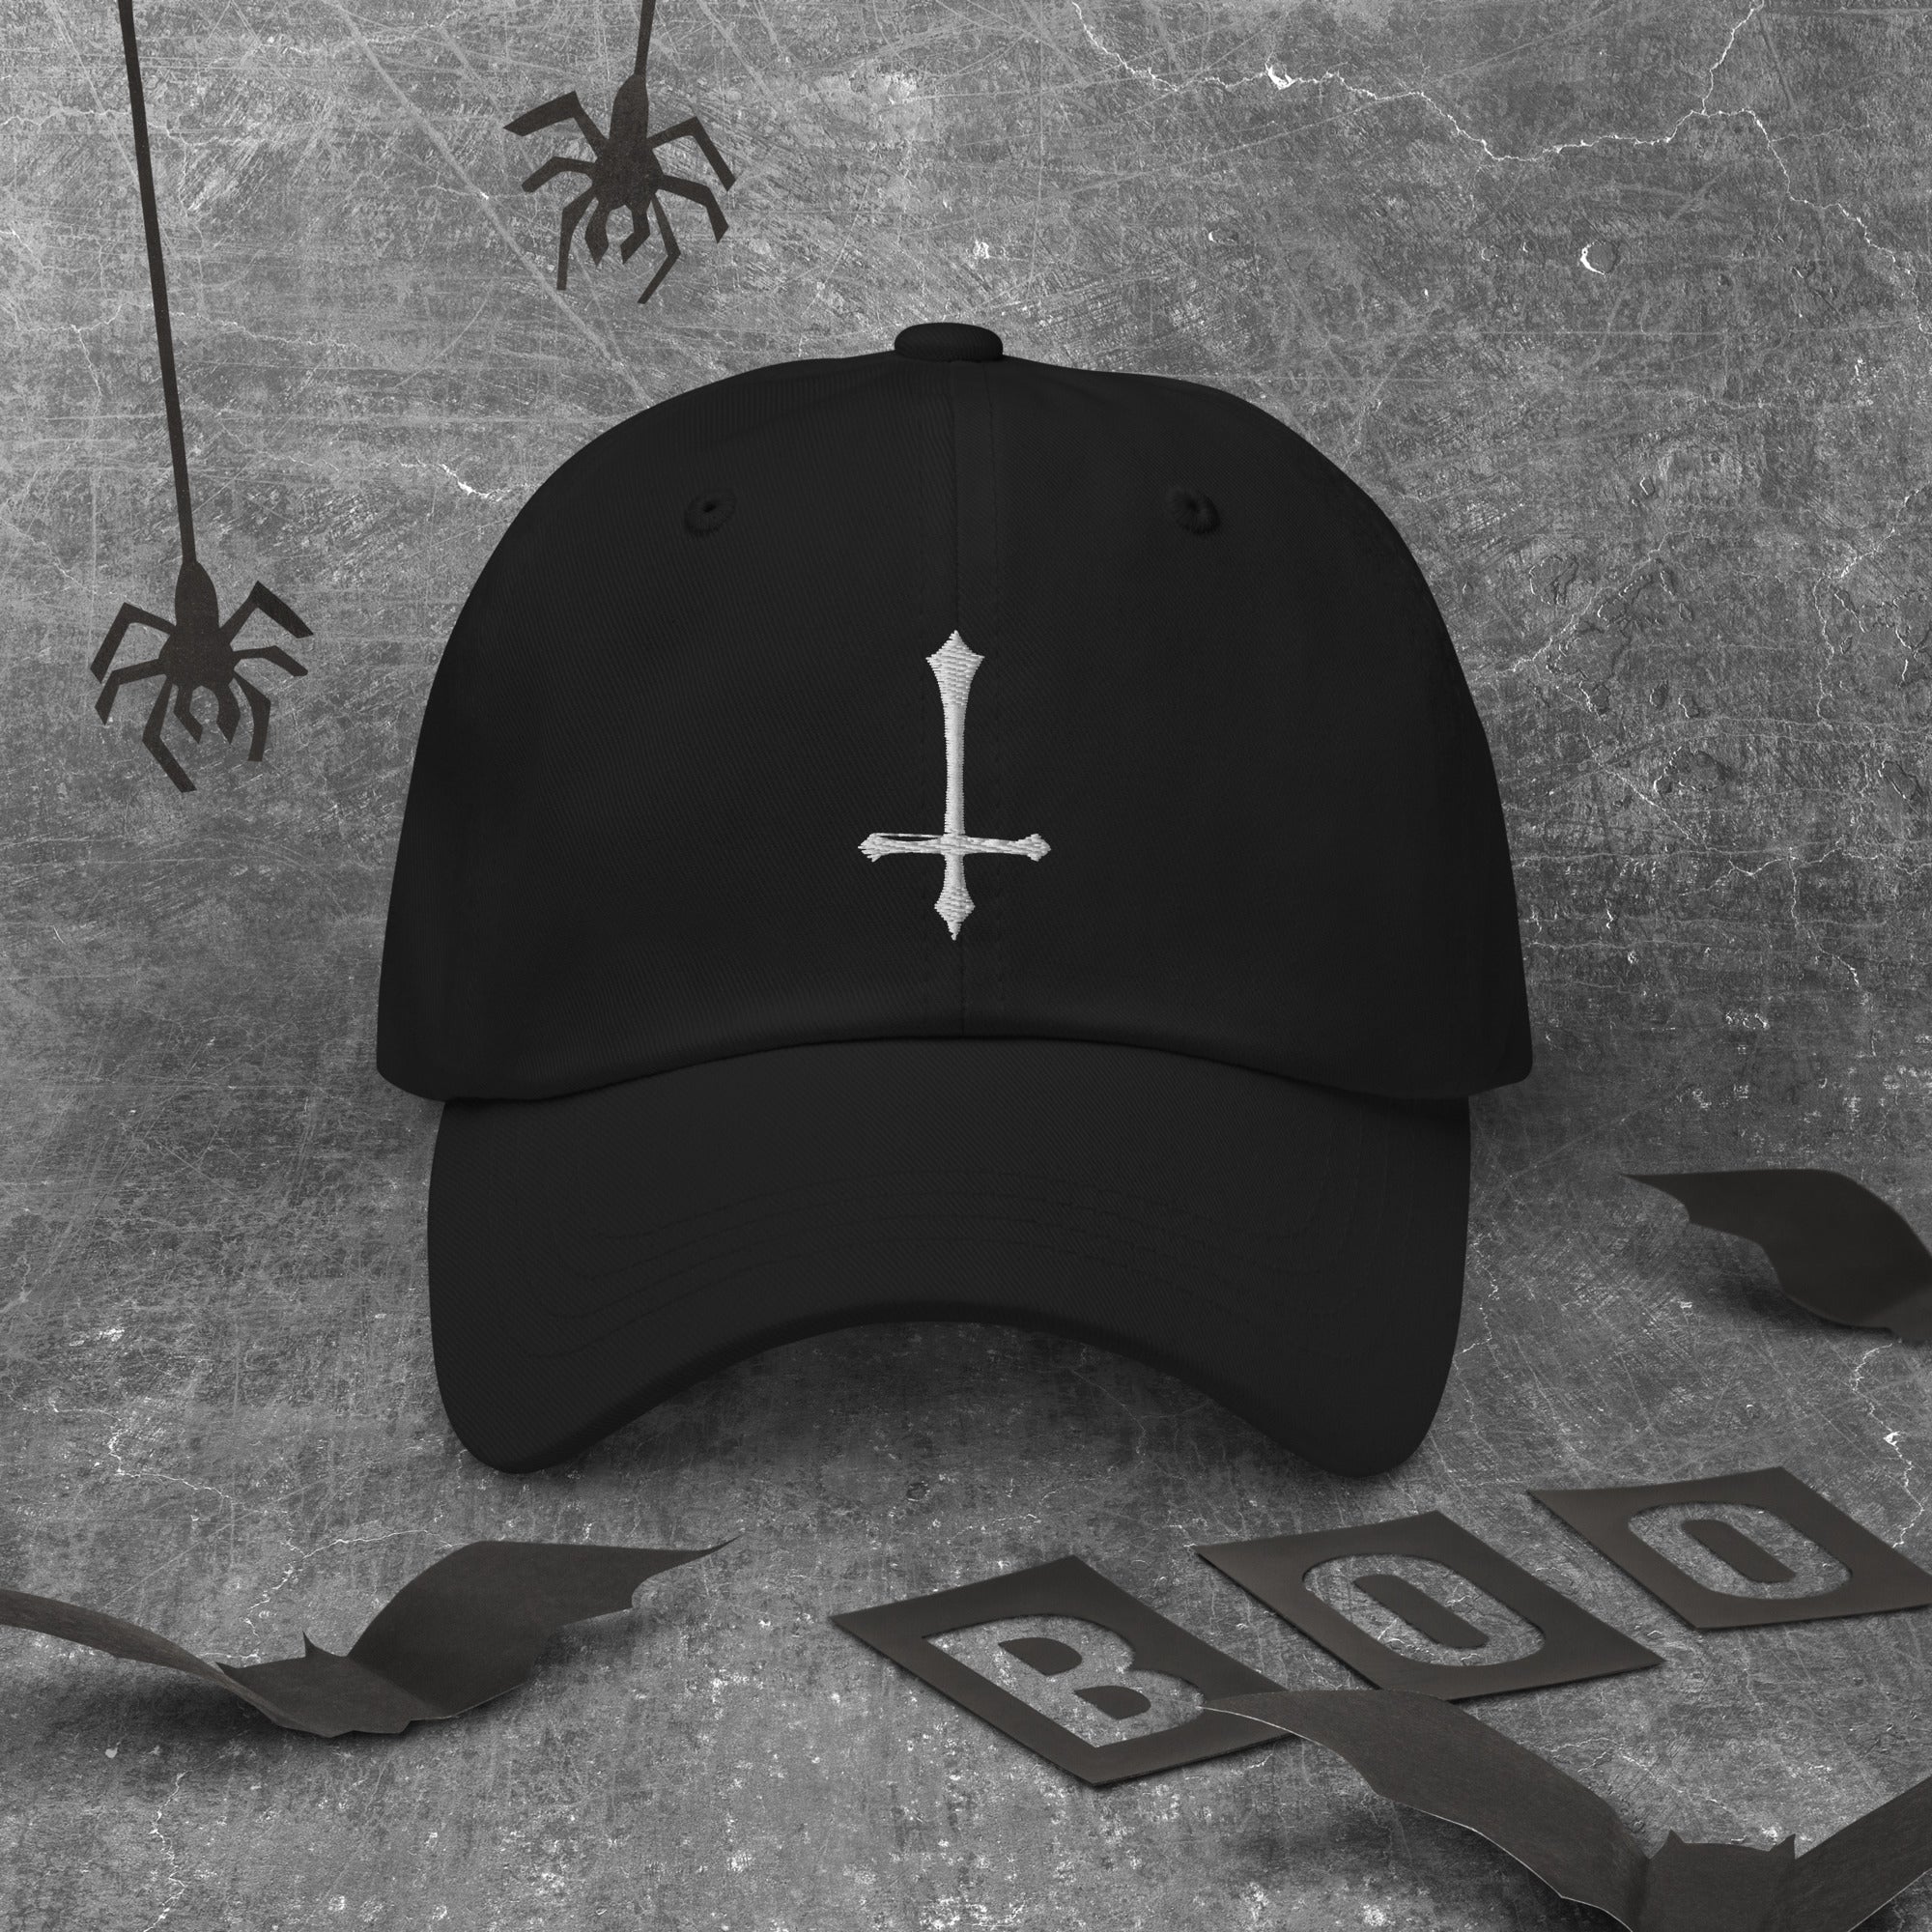 White Inverted Cross Embroidered Baseball Cap Gothic Ancient Medeival Style Dad hat - Edge of Life Designs